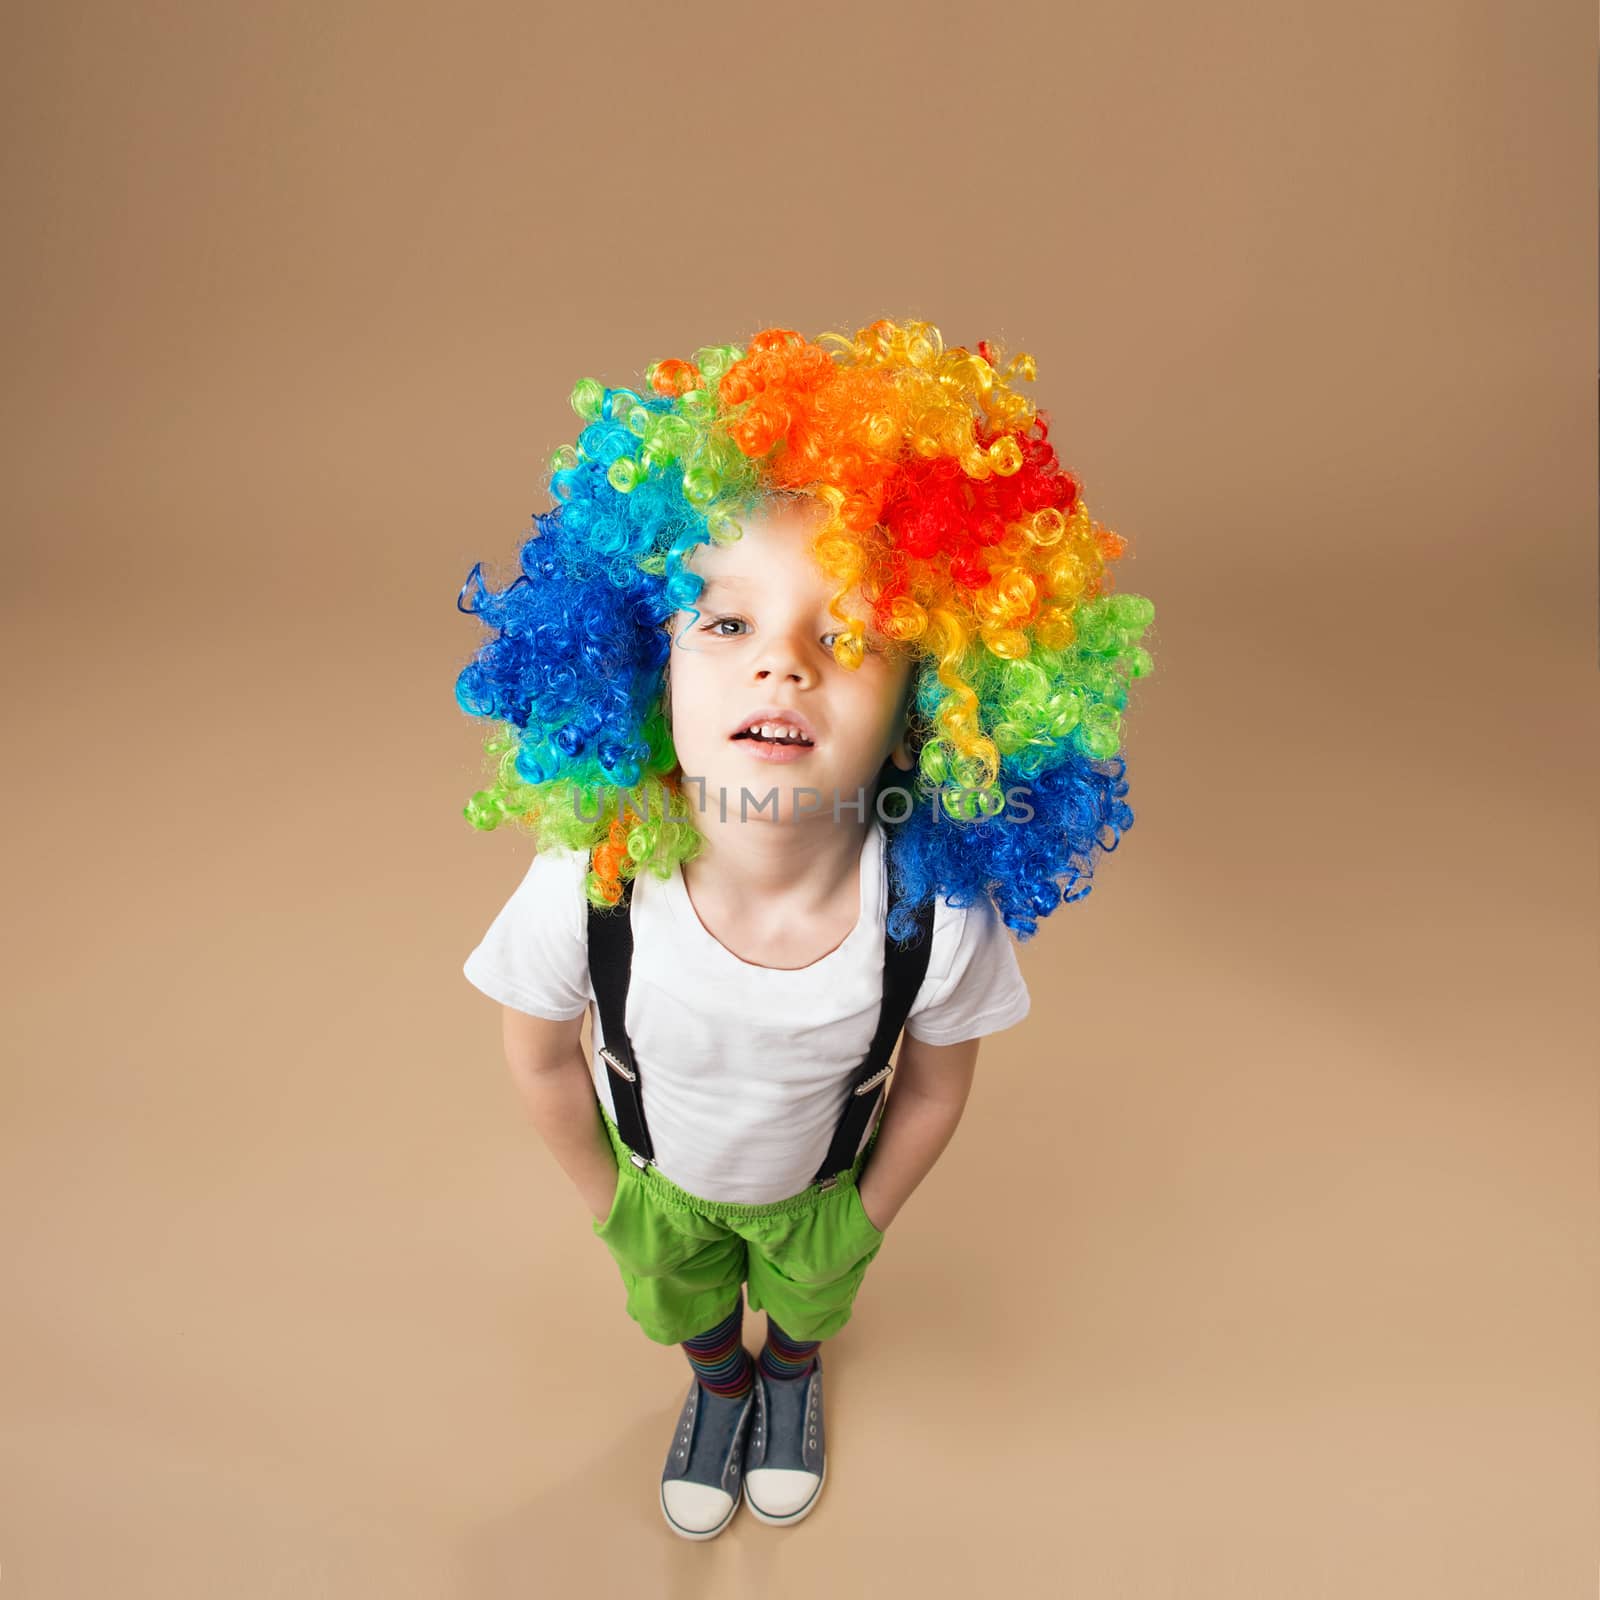 Happy clown boy with large colorful wig. Little boy in clown wig jumping and having fun. Portrait of a child shot on a wide-angle lens. Birthday boy. Positive emotions. Top view portrait